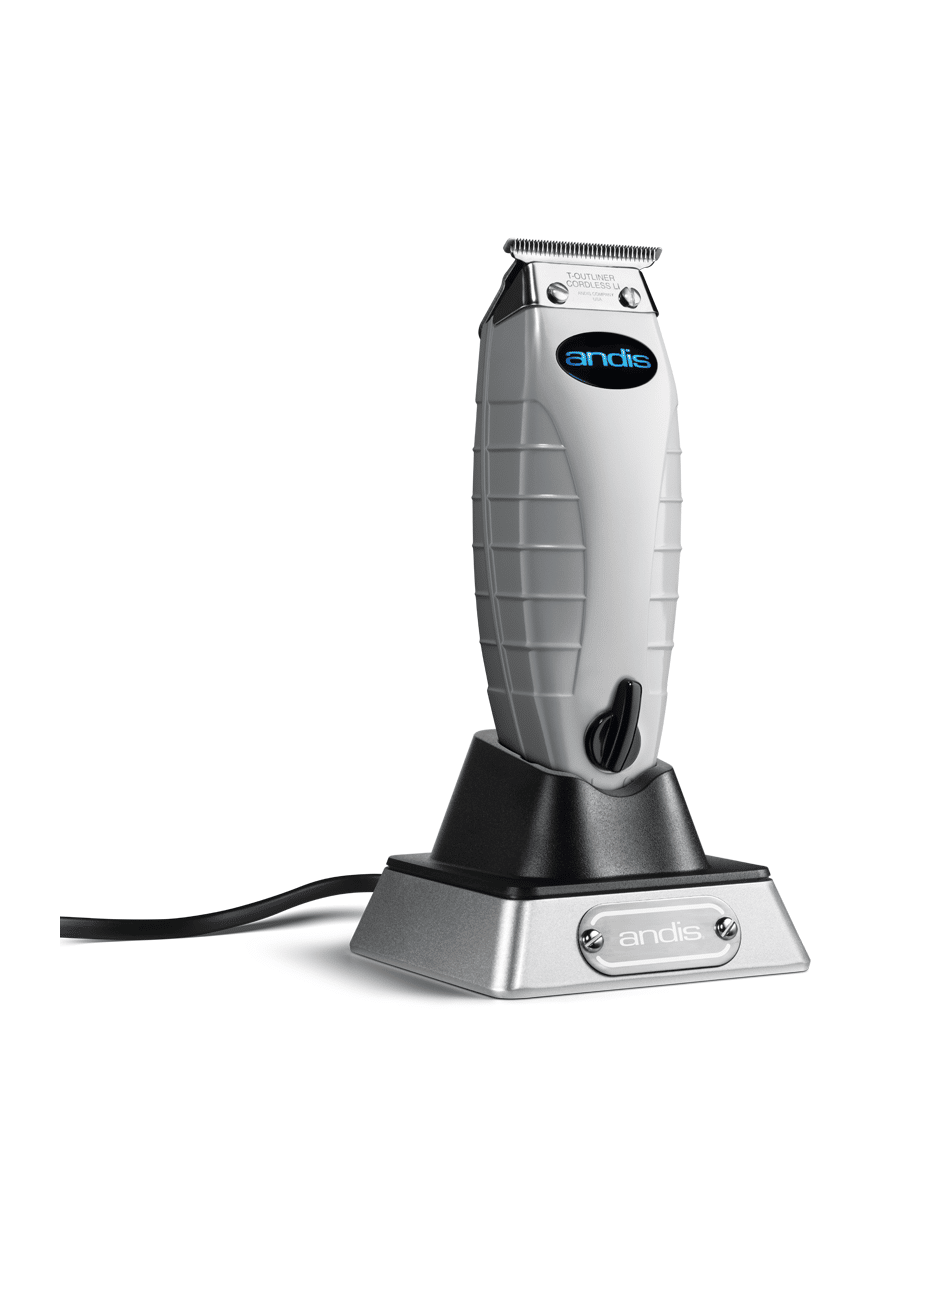 andis t outliner cordless review